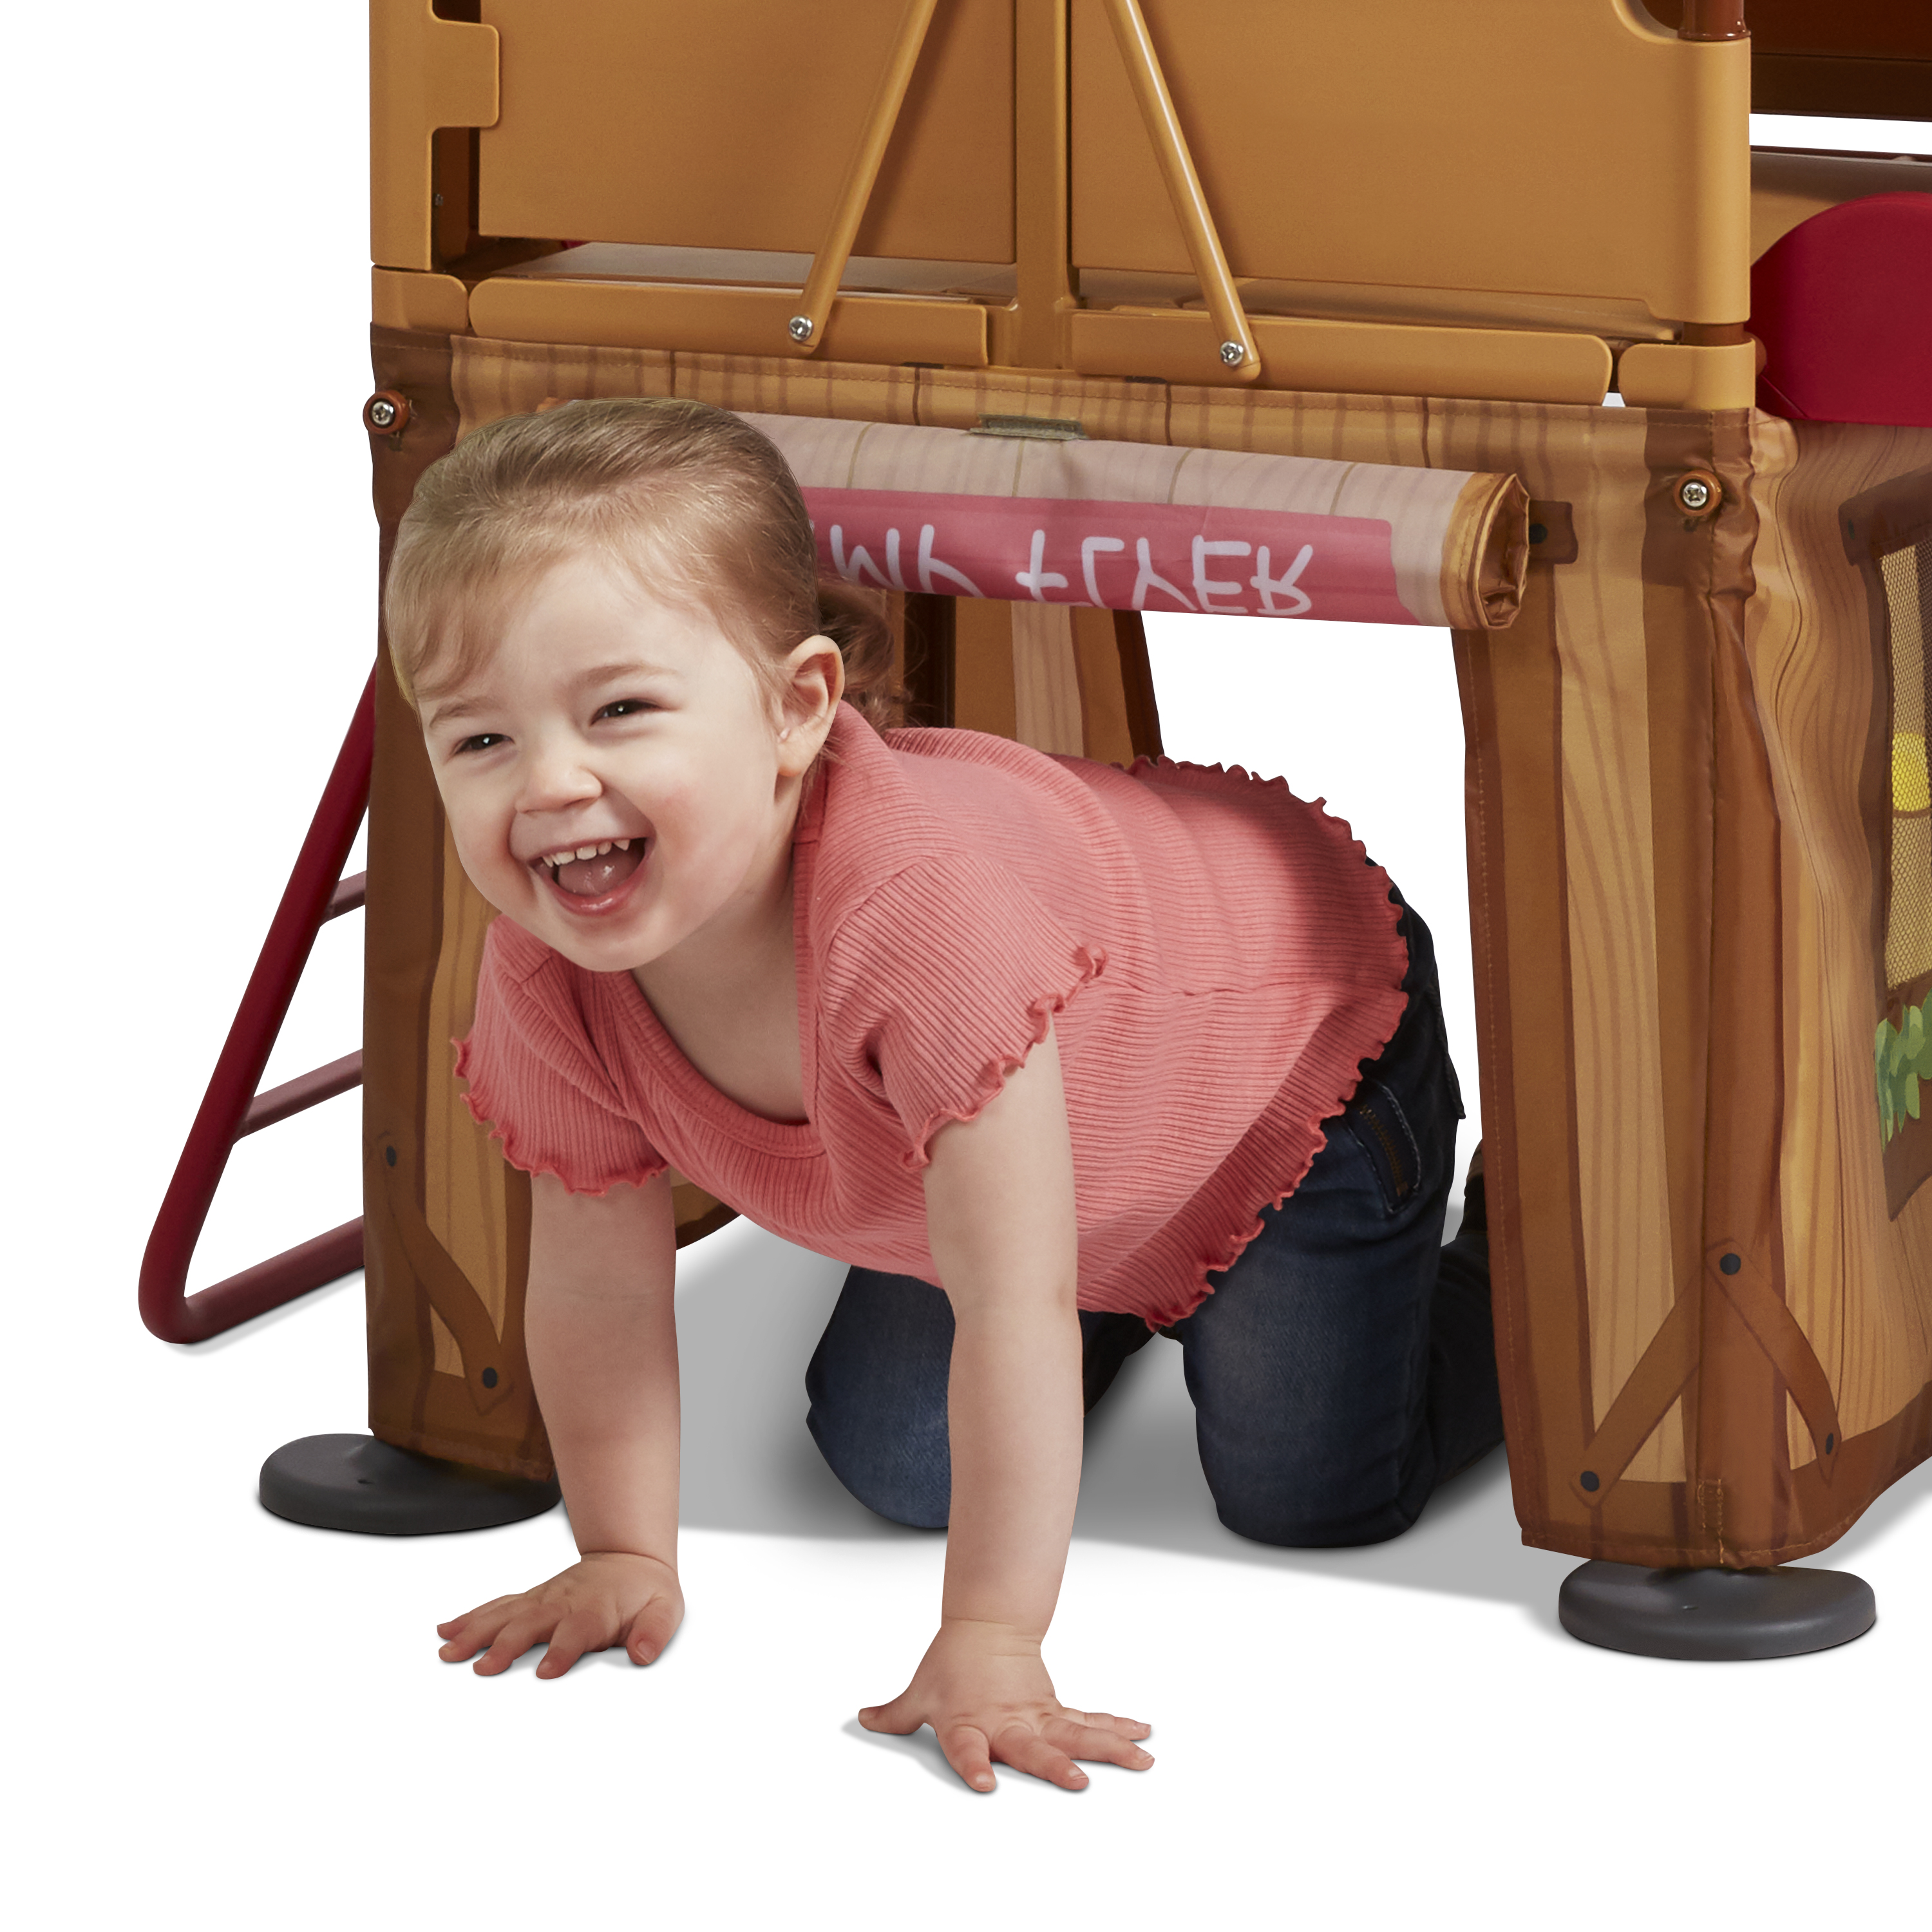 Radio Flyer, Folding Treetop Climber Playset with Slide, for Kids and Toddlers, Ages 2-5 years, Indoor and Outdoor Play - image 5 of 18